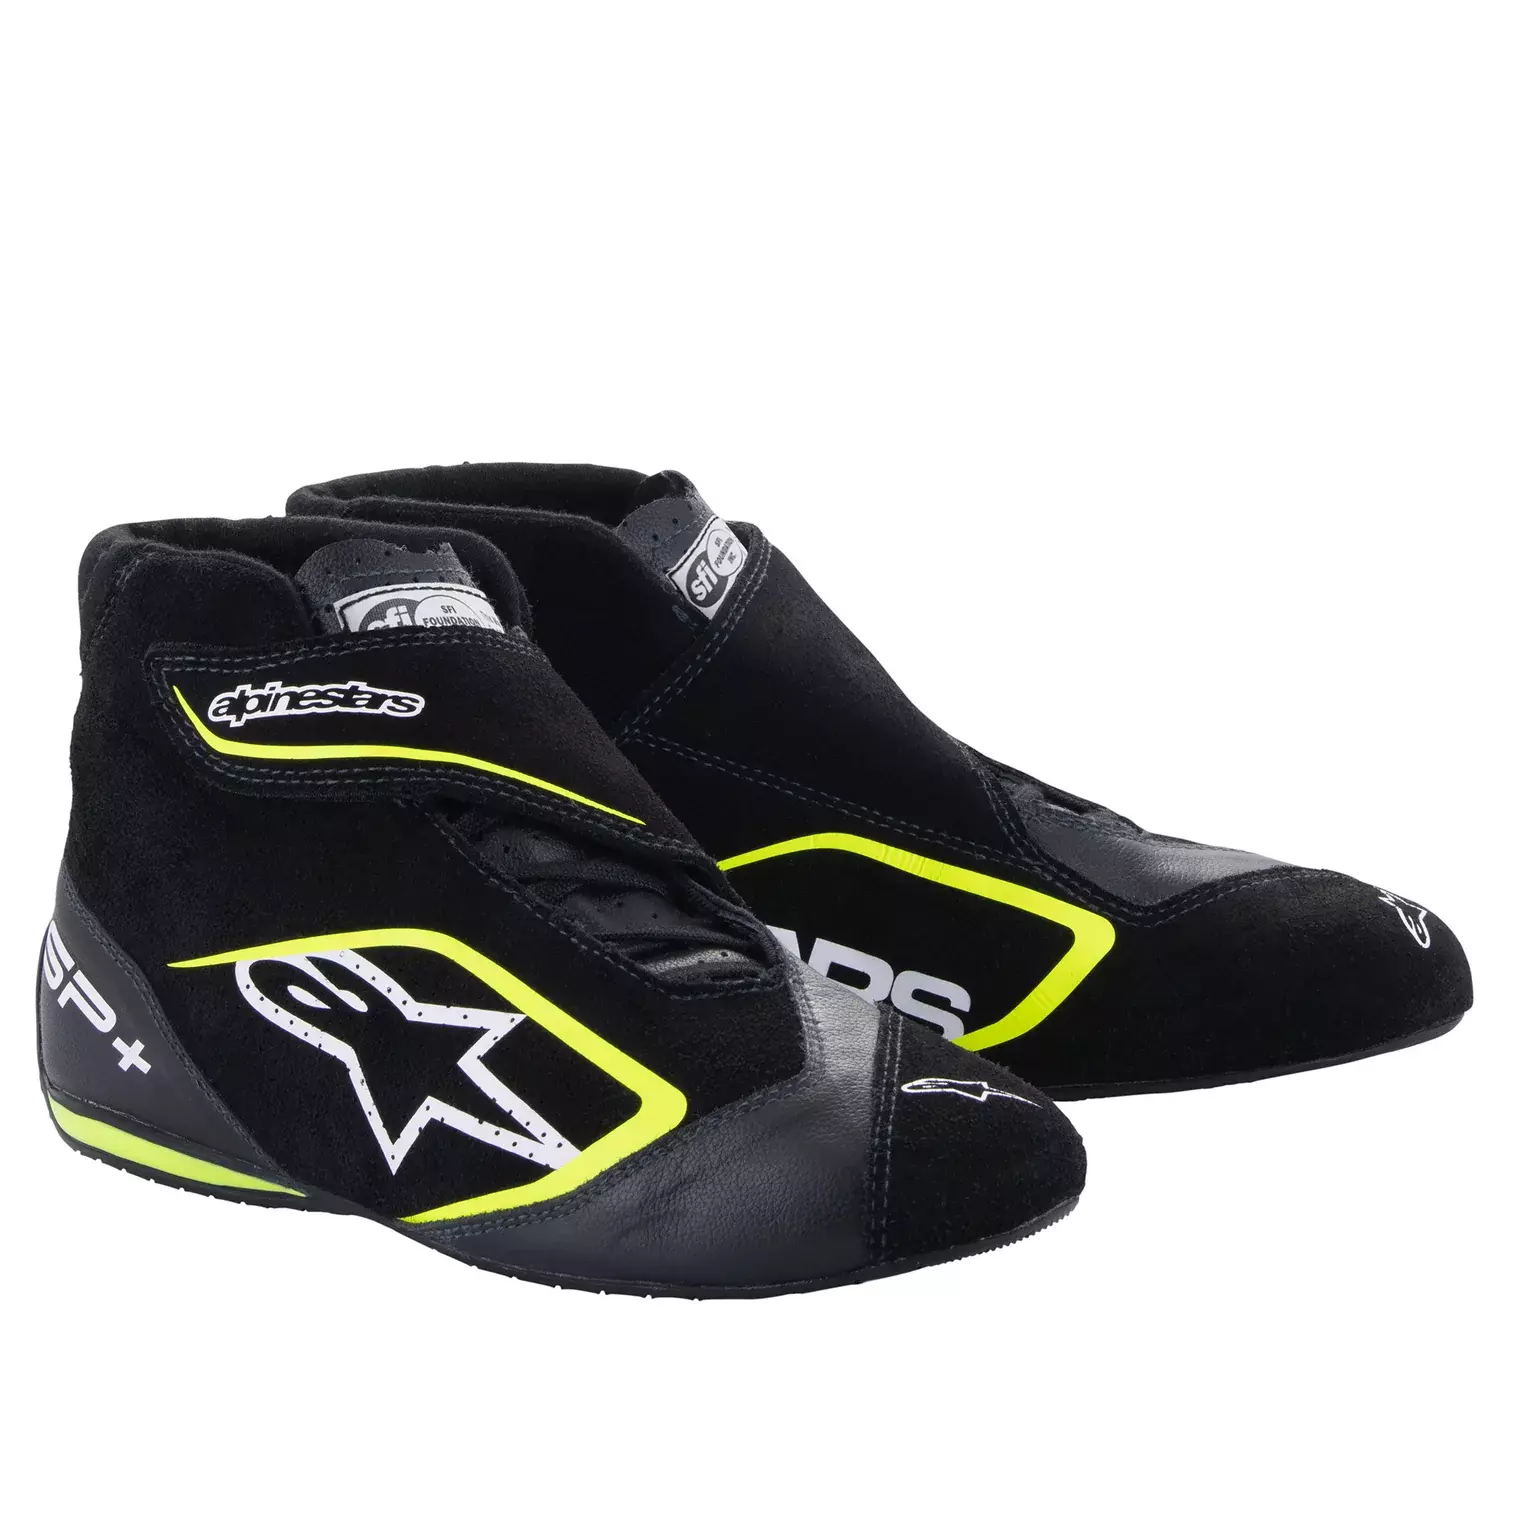 Alpinestars 2710823-155-10.5 Driving Shoe, SP+, Mid-Top, SFI 3.3, FIA Approved, Suede Outer, Nomex Inner, Black / Fluorescent Yellow, Size 10.5, Pair